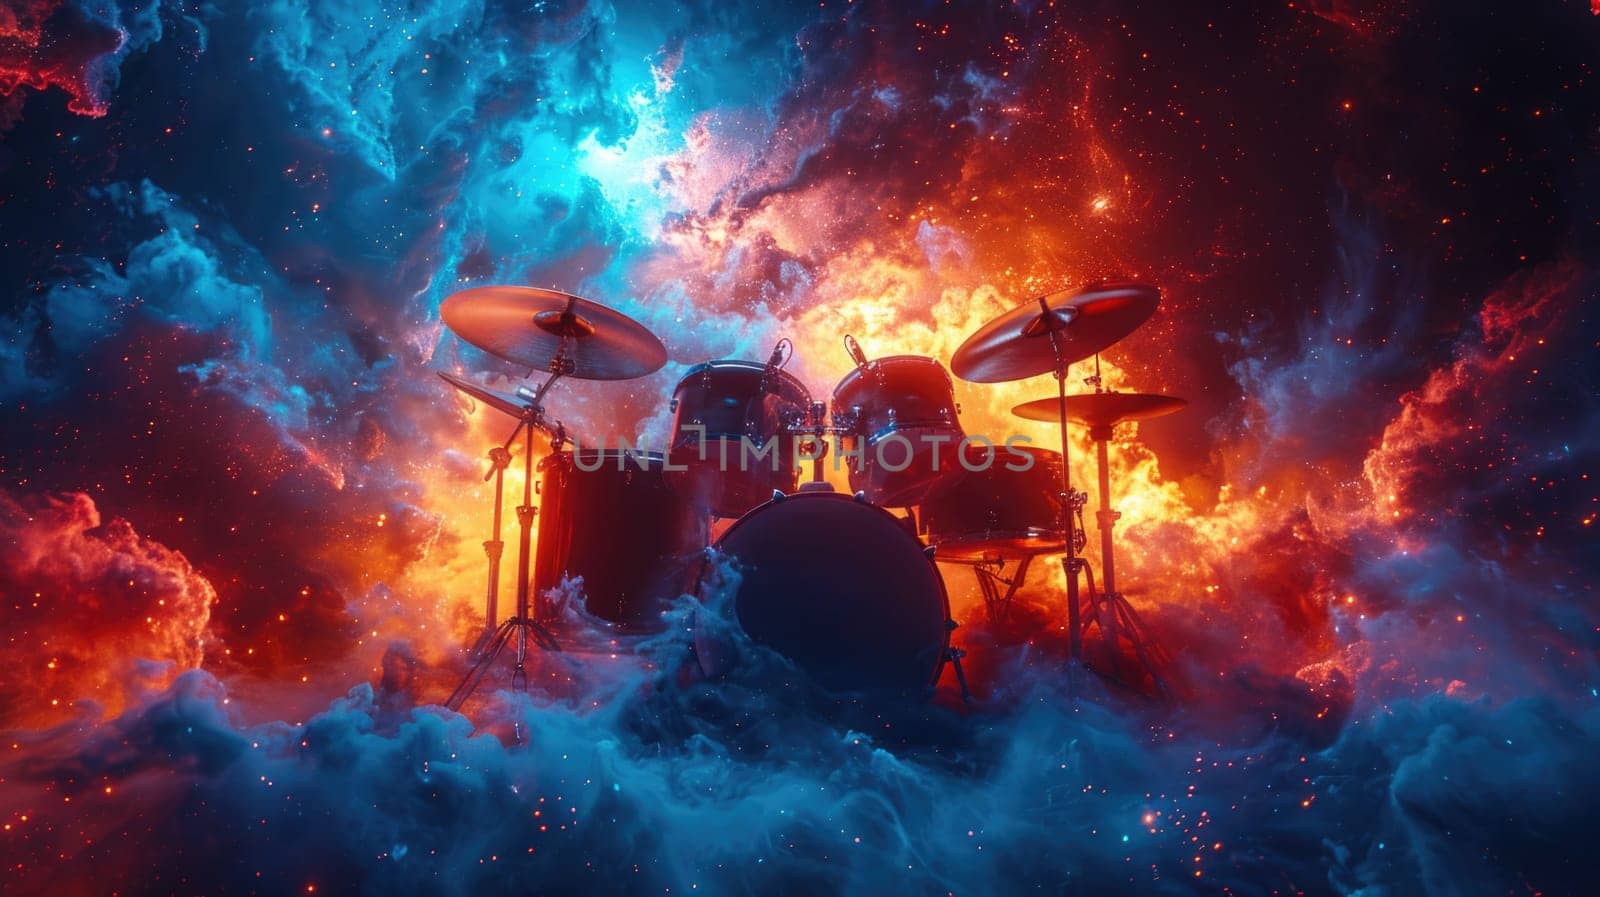 Drum Set Against Colorful Background by but_photo